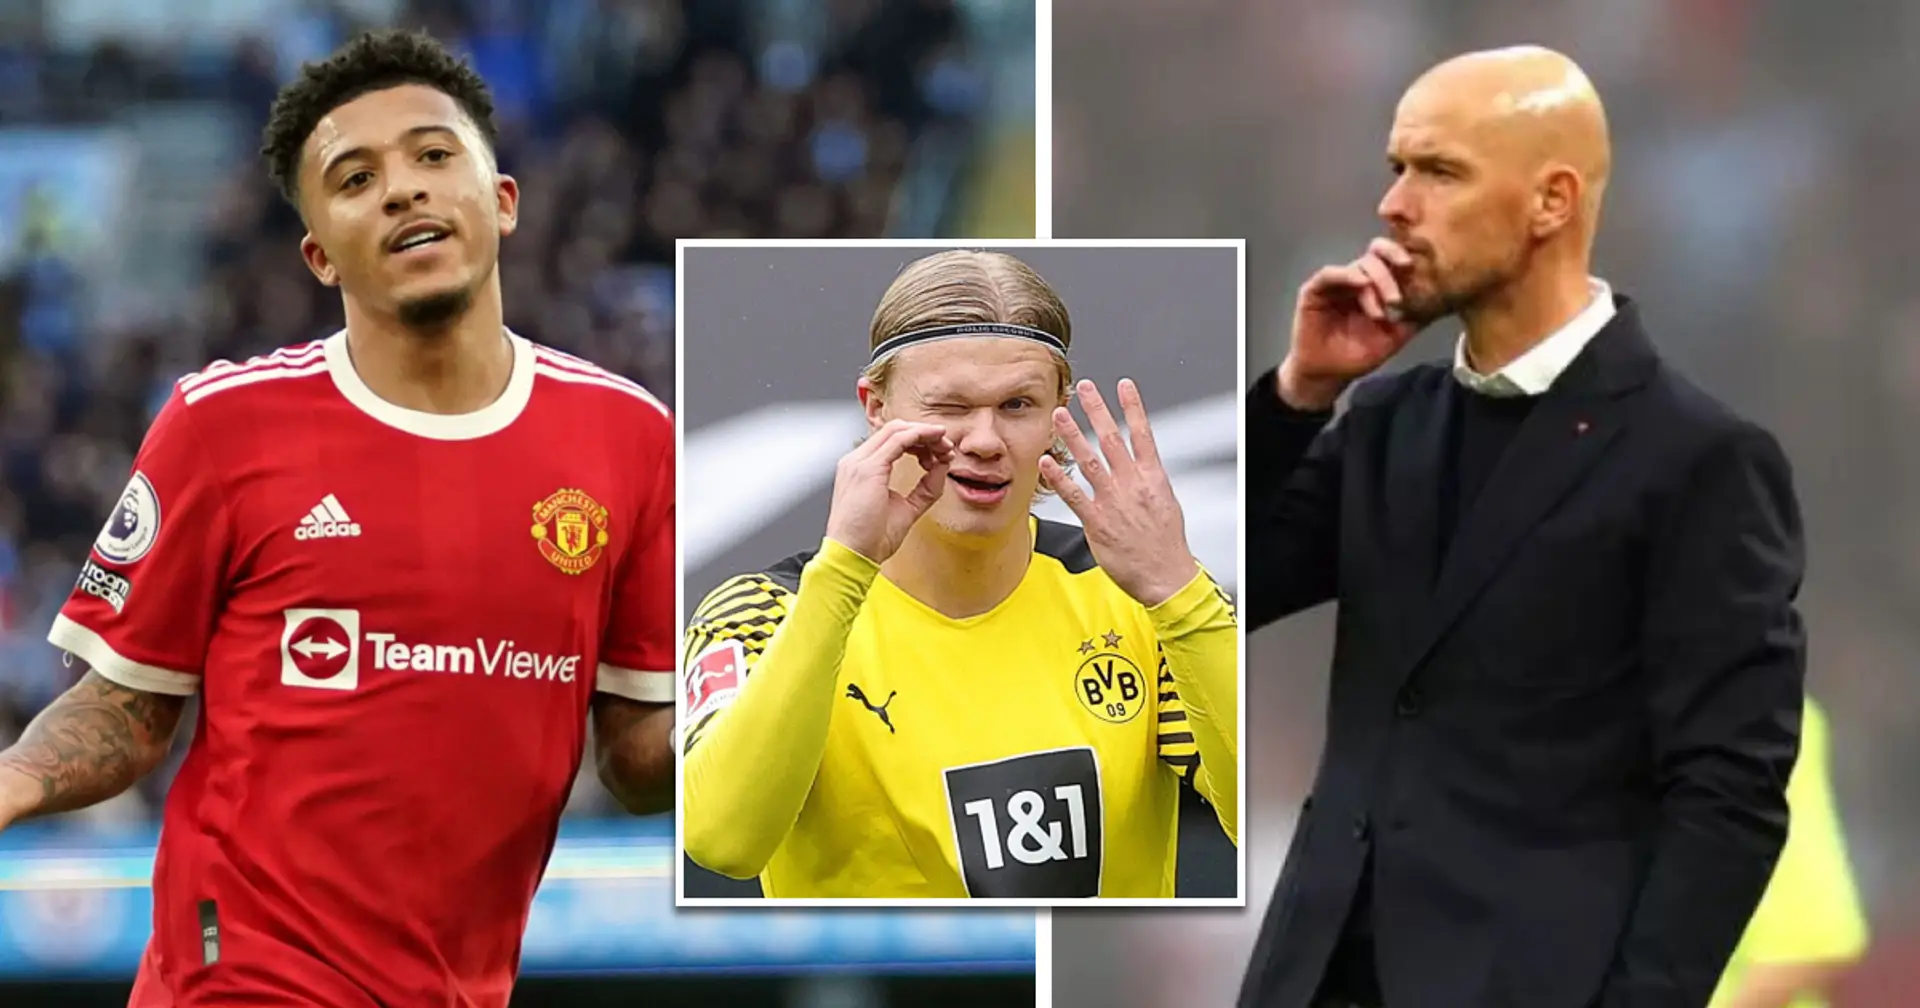 'Sancho outperformed Haaland in the Bundesliga': Man United fans explain why Jadon Sancho has to stay at the club